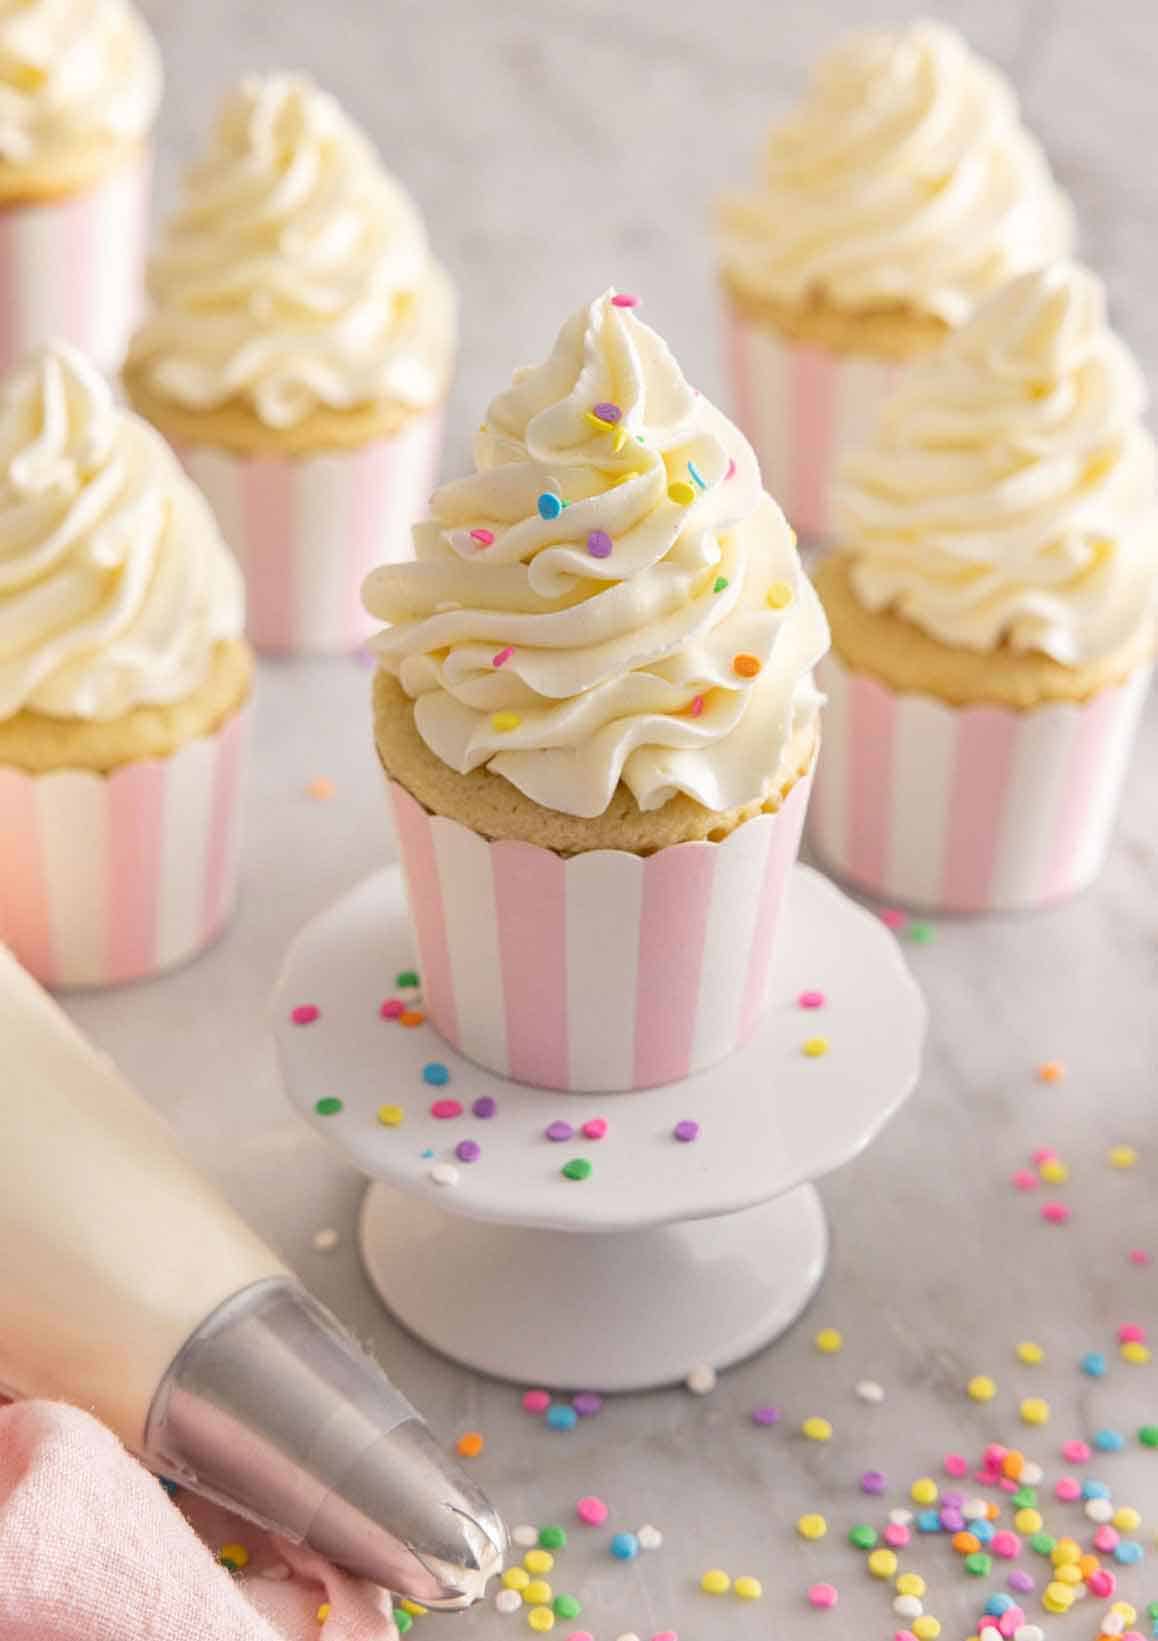 Multiple cupcakes with Italian buttercream piped on top with sprinkles.